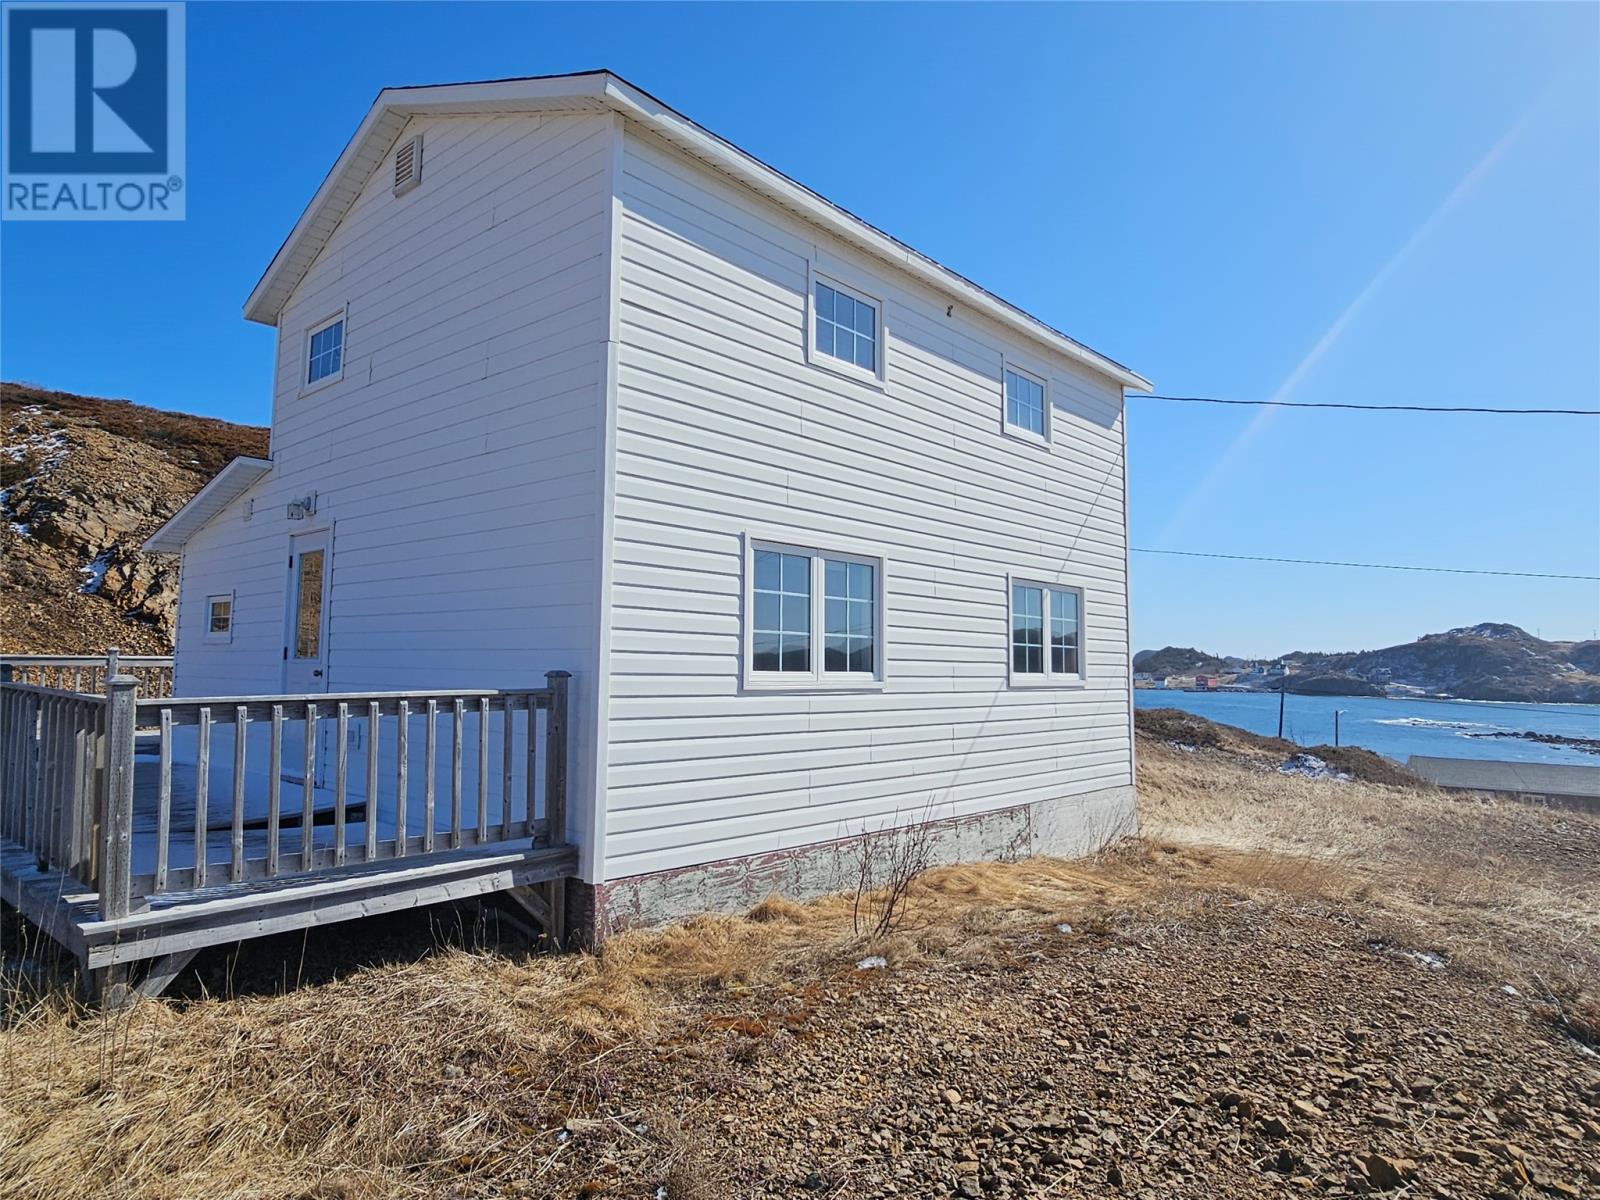 2 Bedroom Residential Home For Sale | 21 Museum Road | Twillingate | A0G1Y0